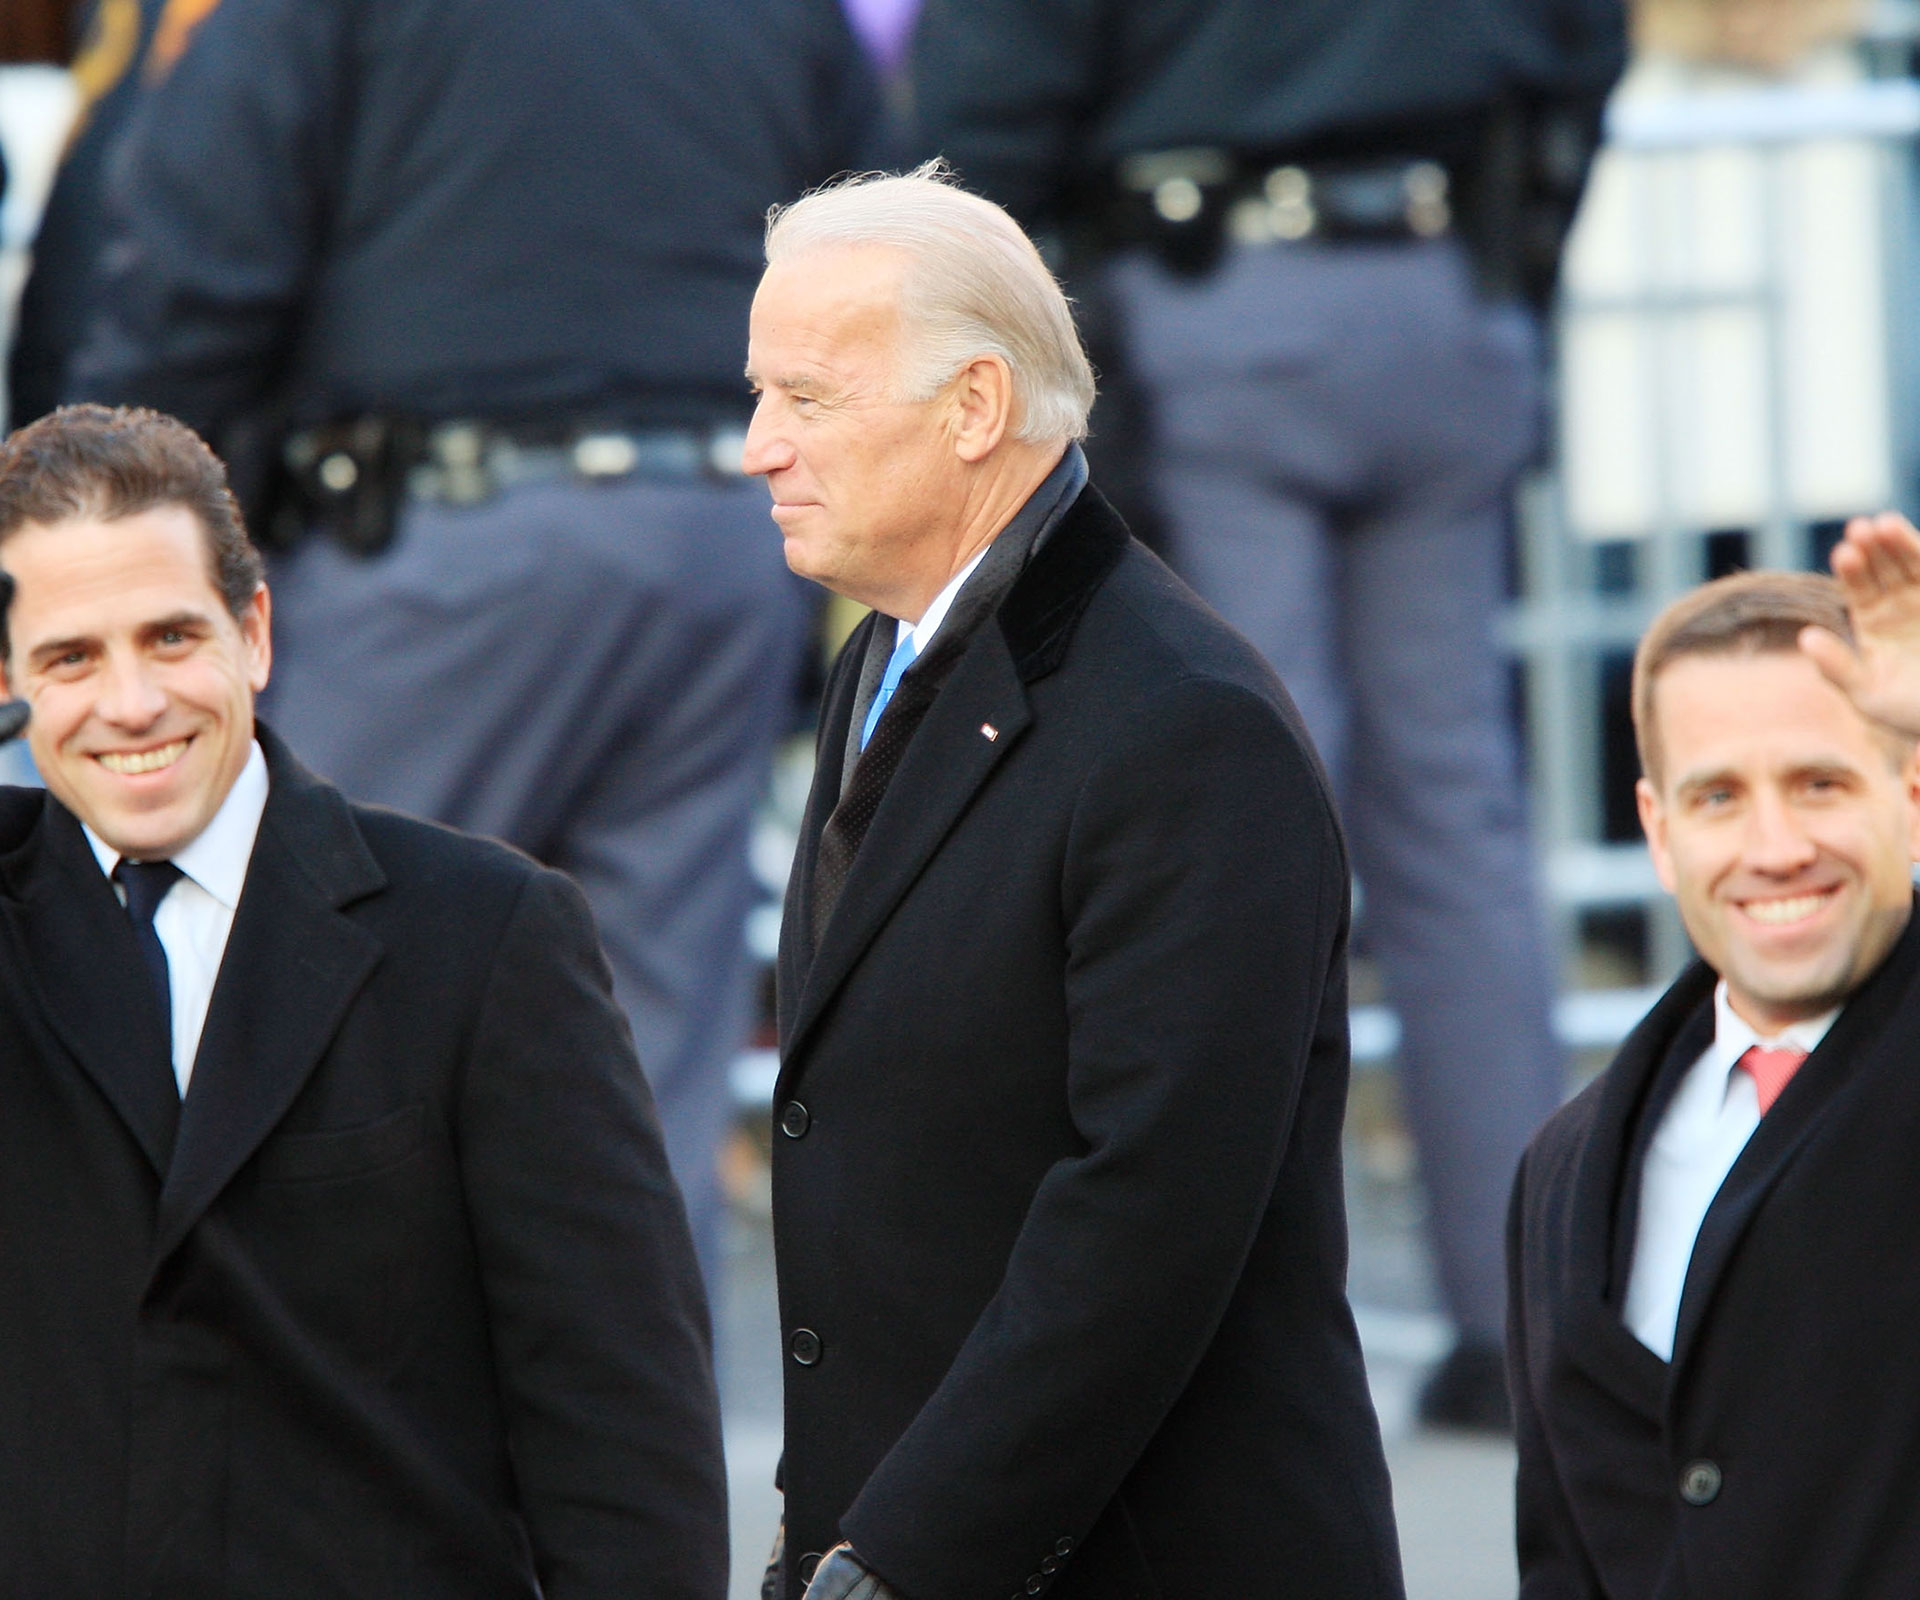 Former U.S. Vice President Joe Biden’s son is in a relationship with his brother’s widow